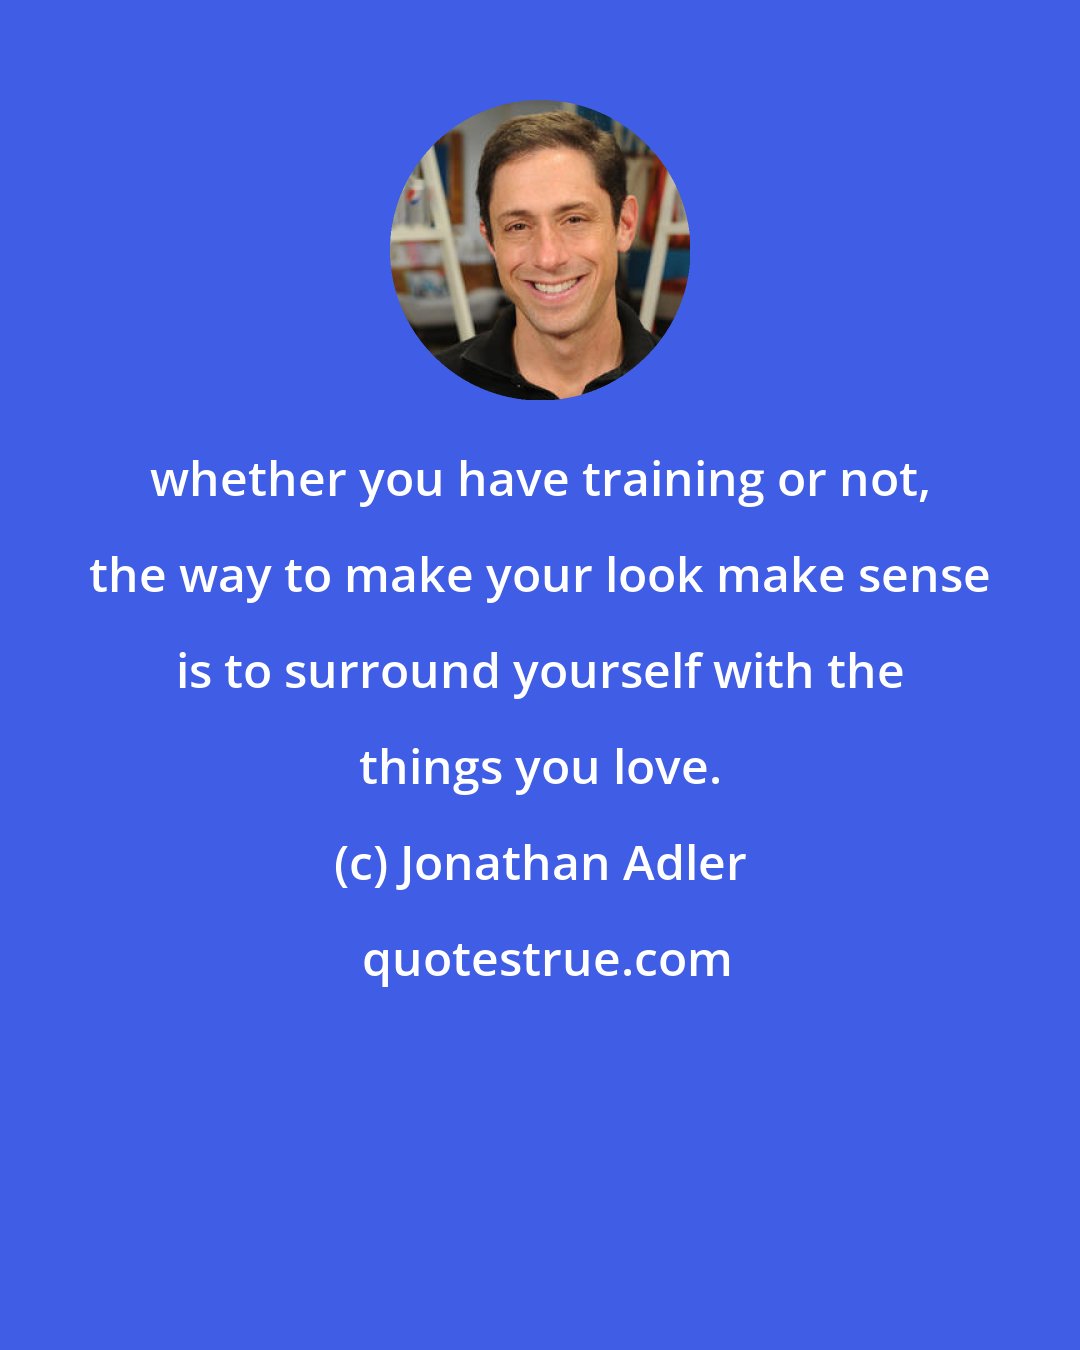 Jonathan Adler: whether you have training or not, the way to make your look make sense is to surround yourself with the things you love.